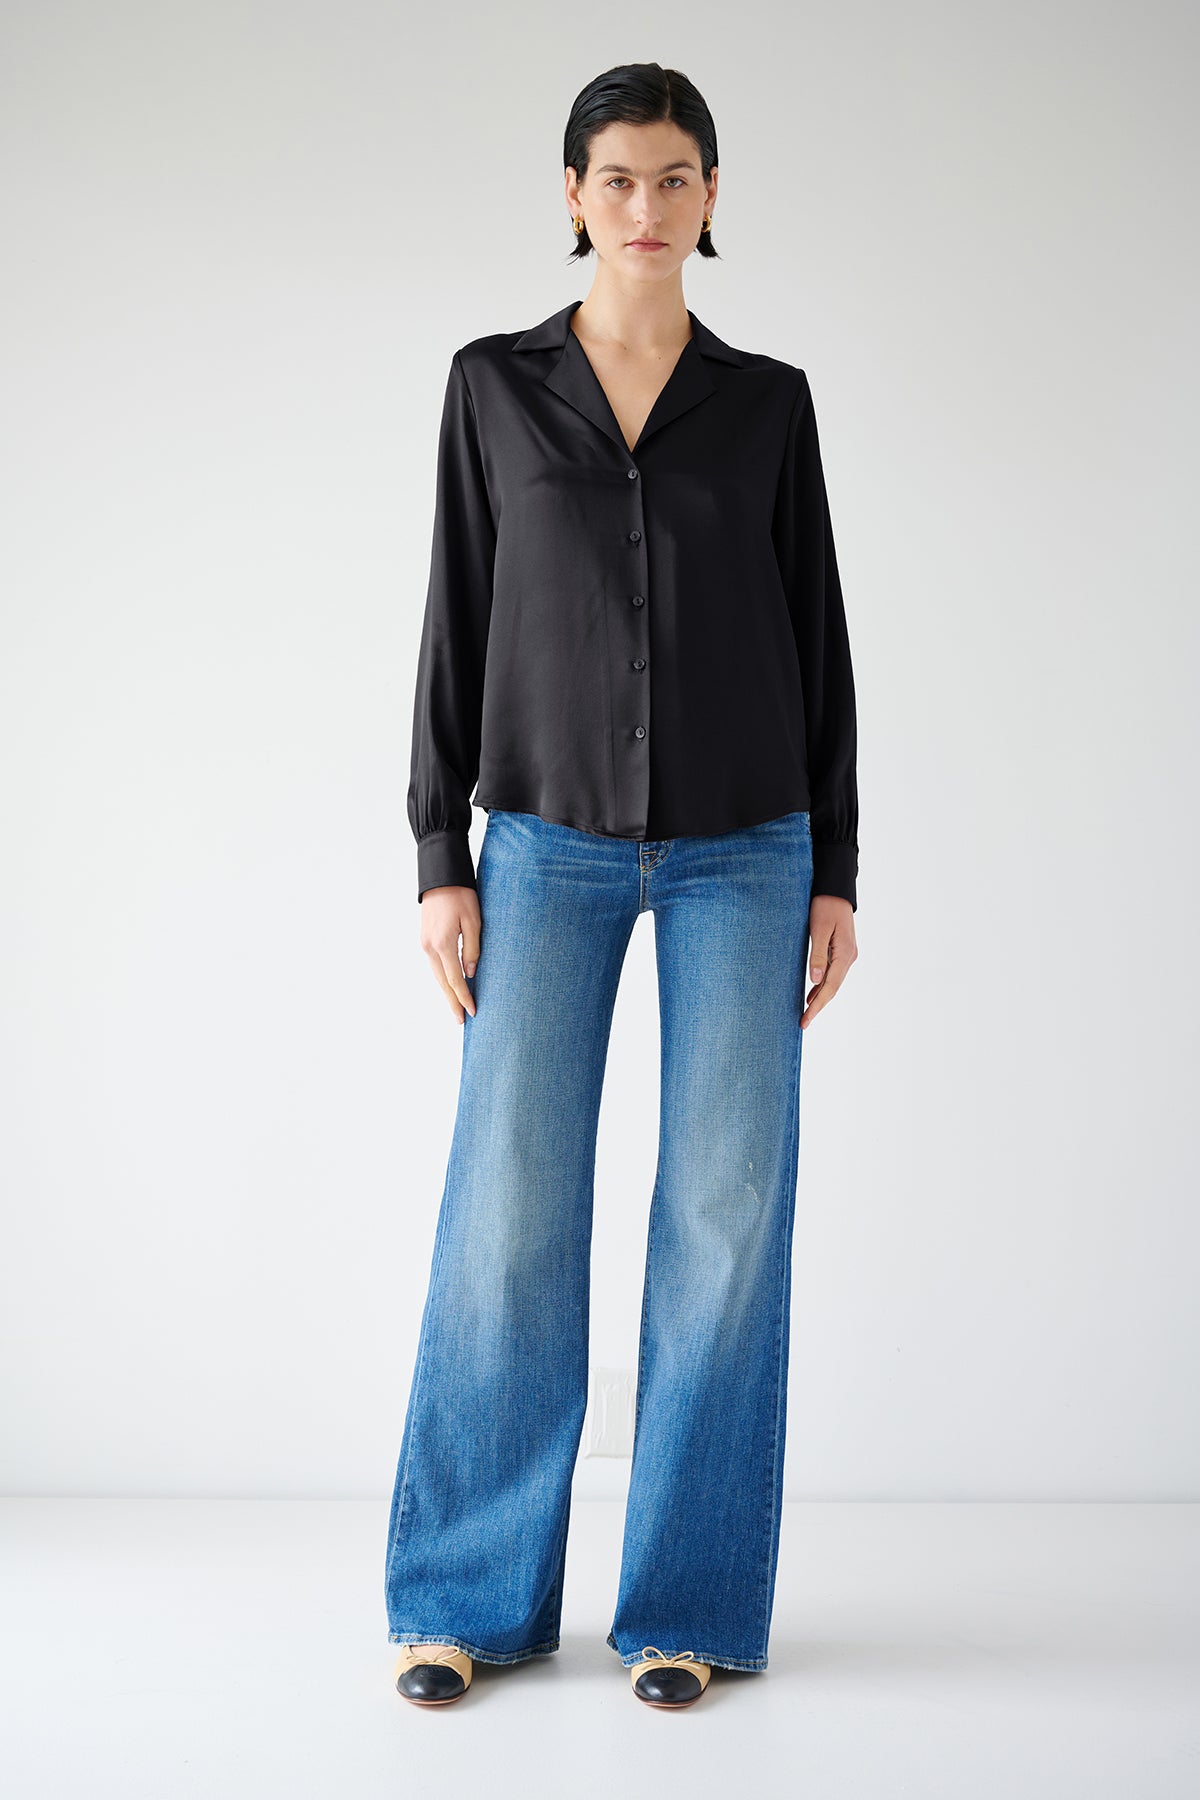 The model is wearing a timeless SOHO TOP blouse by Velvet by Jenny Graham and blue wide leg jeans.-35547449000129